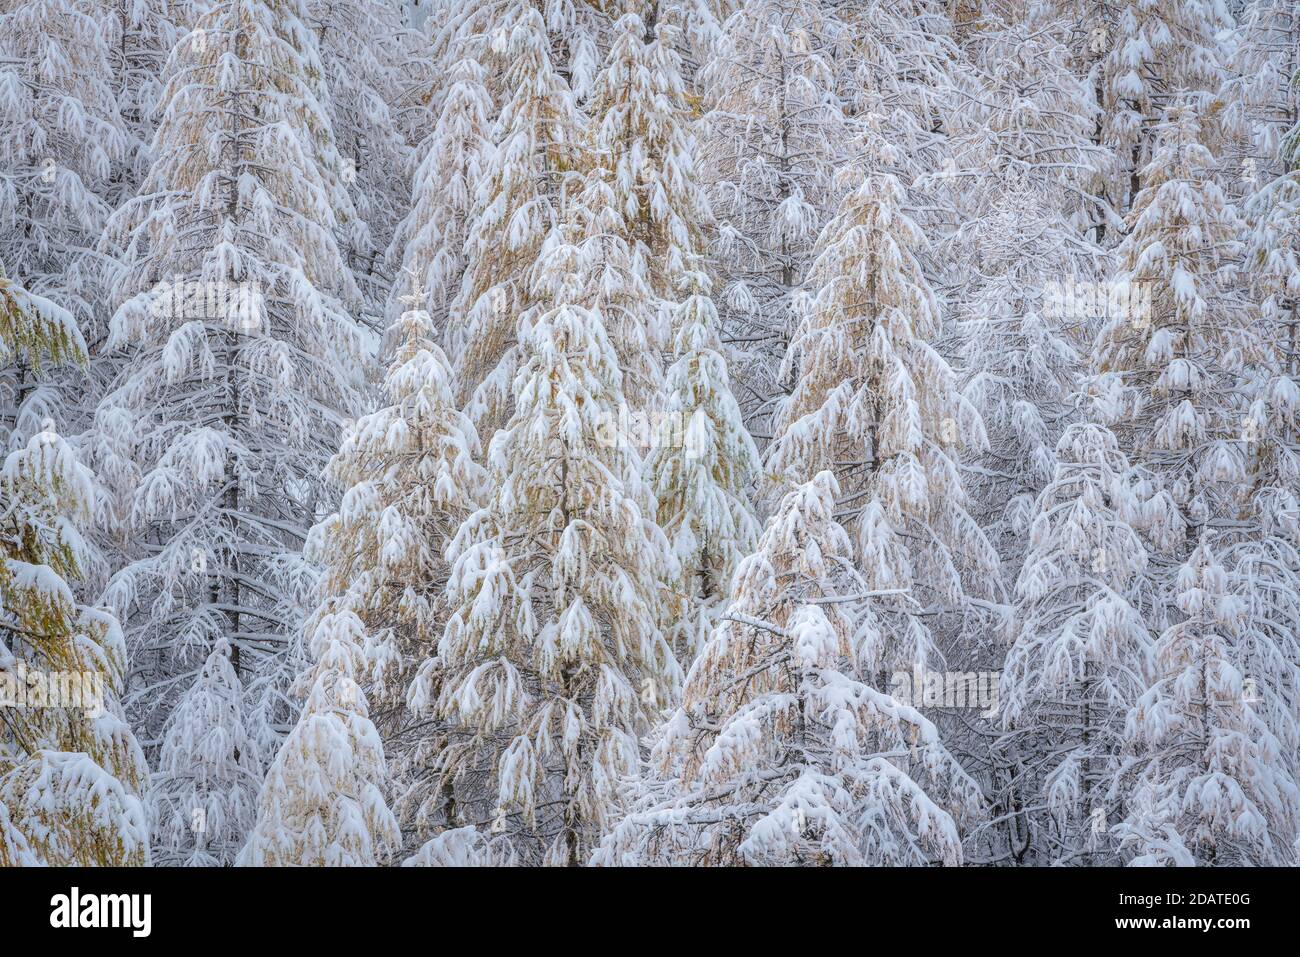 Snowy larch tree forest in Col de La Cayolle, Mercantour National Park in Winter. Ubaye Valley, Alpes-de-Haute-Provence, Alps, France Stock Photo